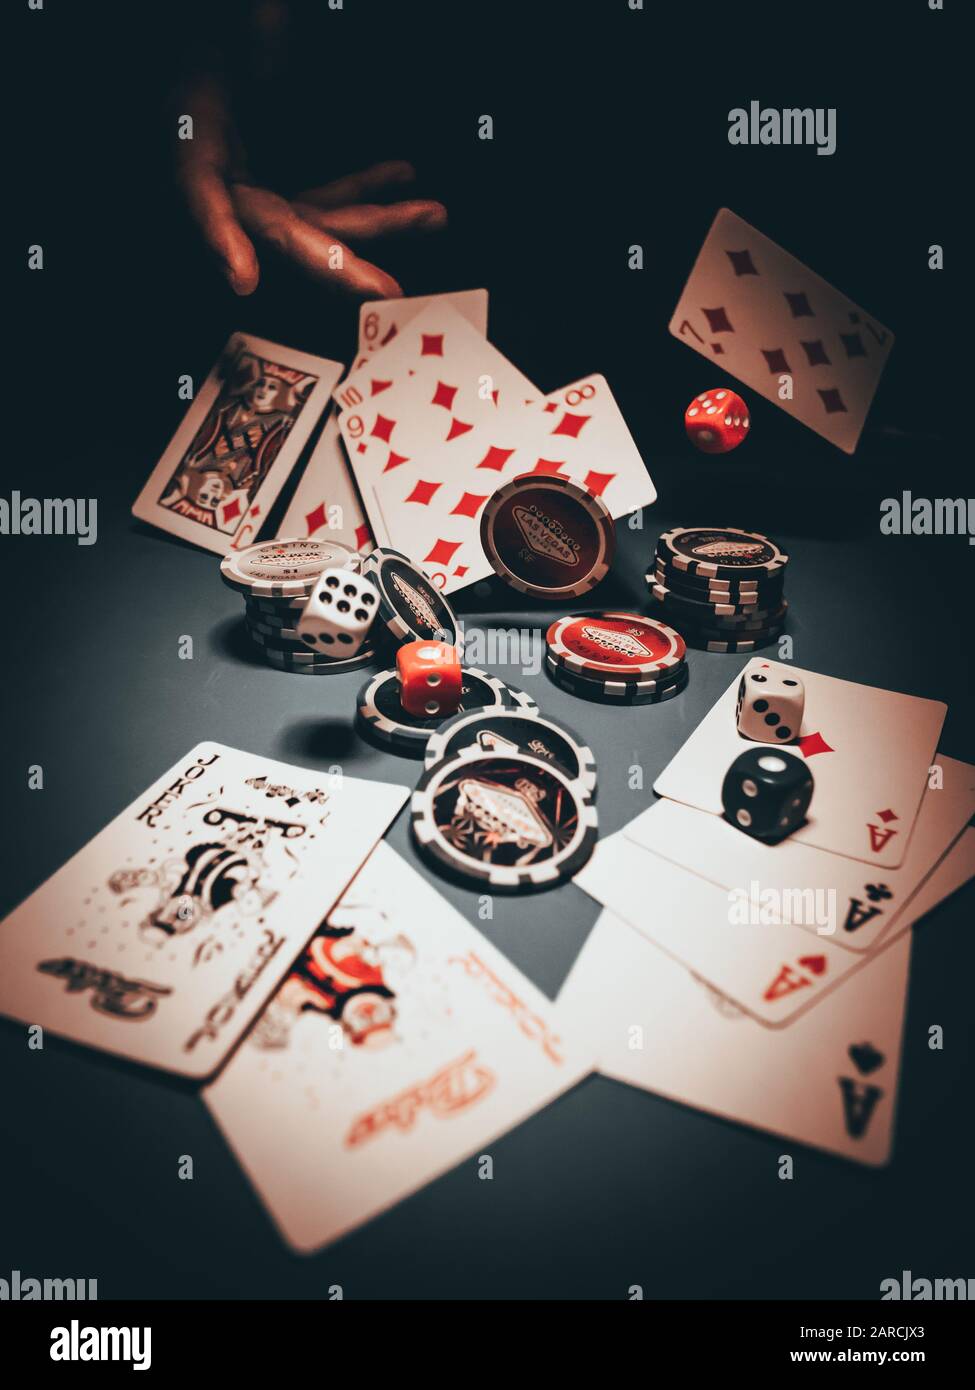 Cards, fiches and dices for a creative casino shoot Stock Photo